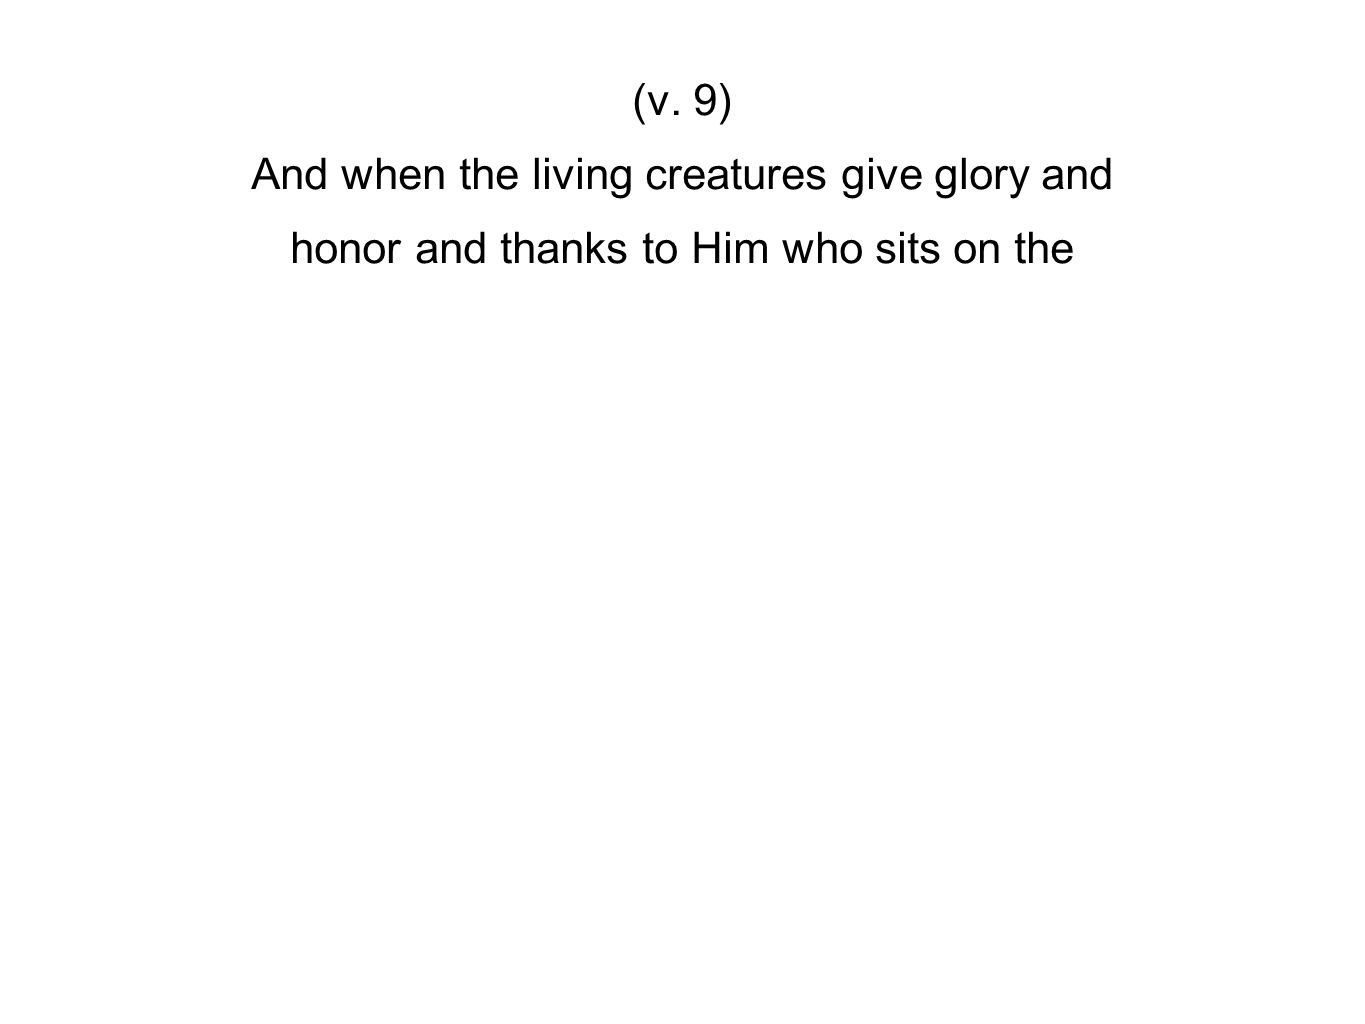 (v. 9) And when the living creatures give glory and honor and thanks to Him who sits on the